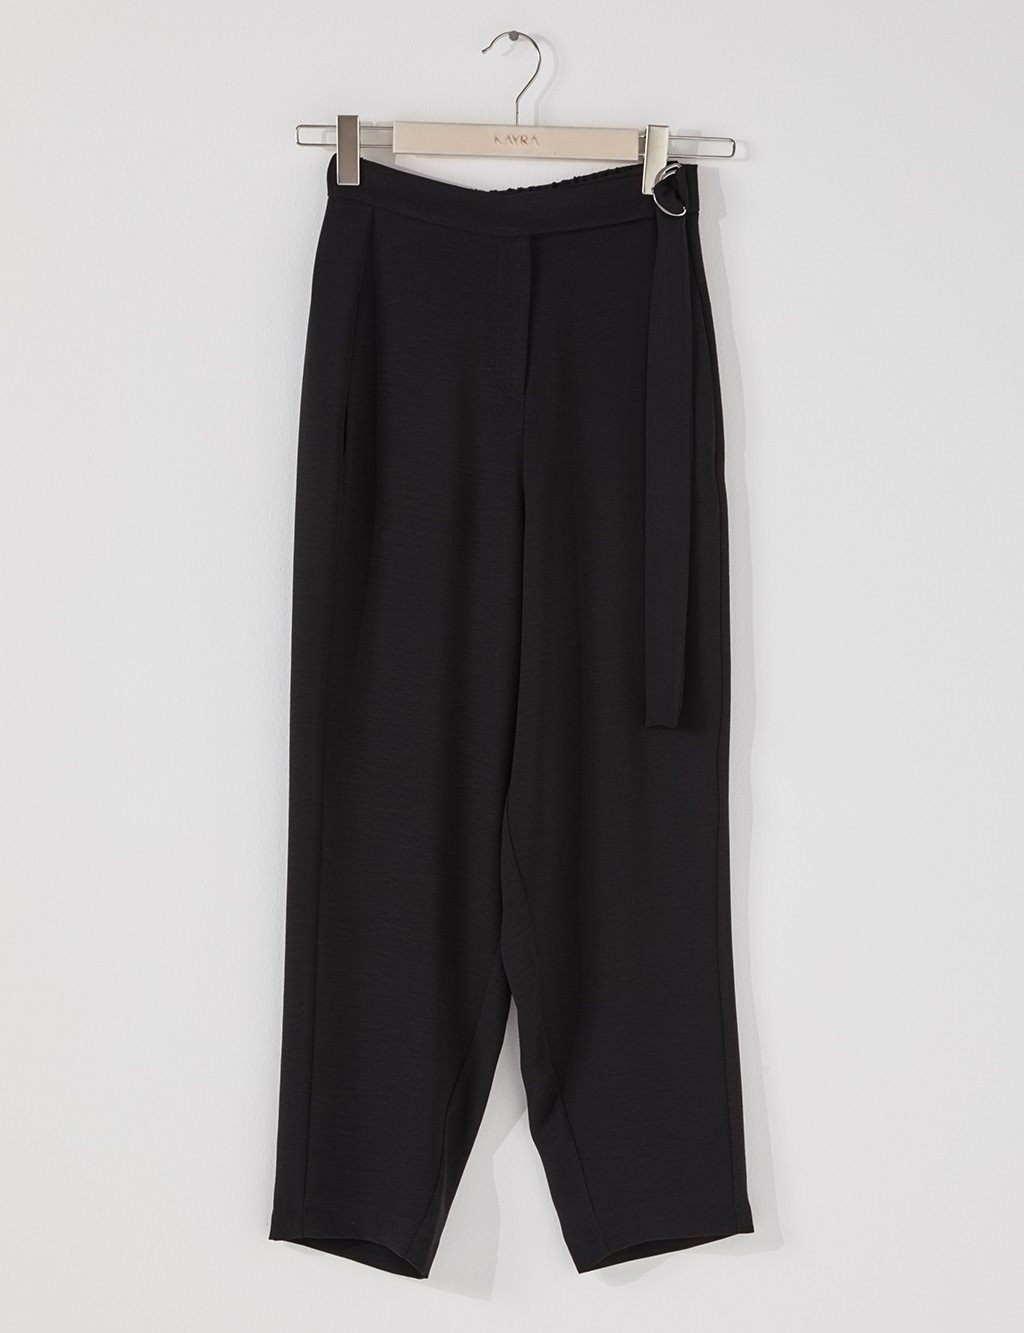 Belted Fabric Pants B21 19066 Black